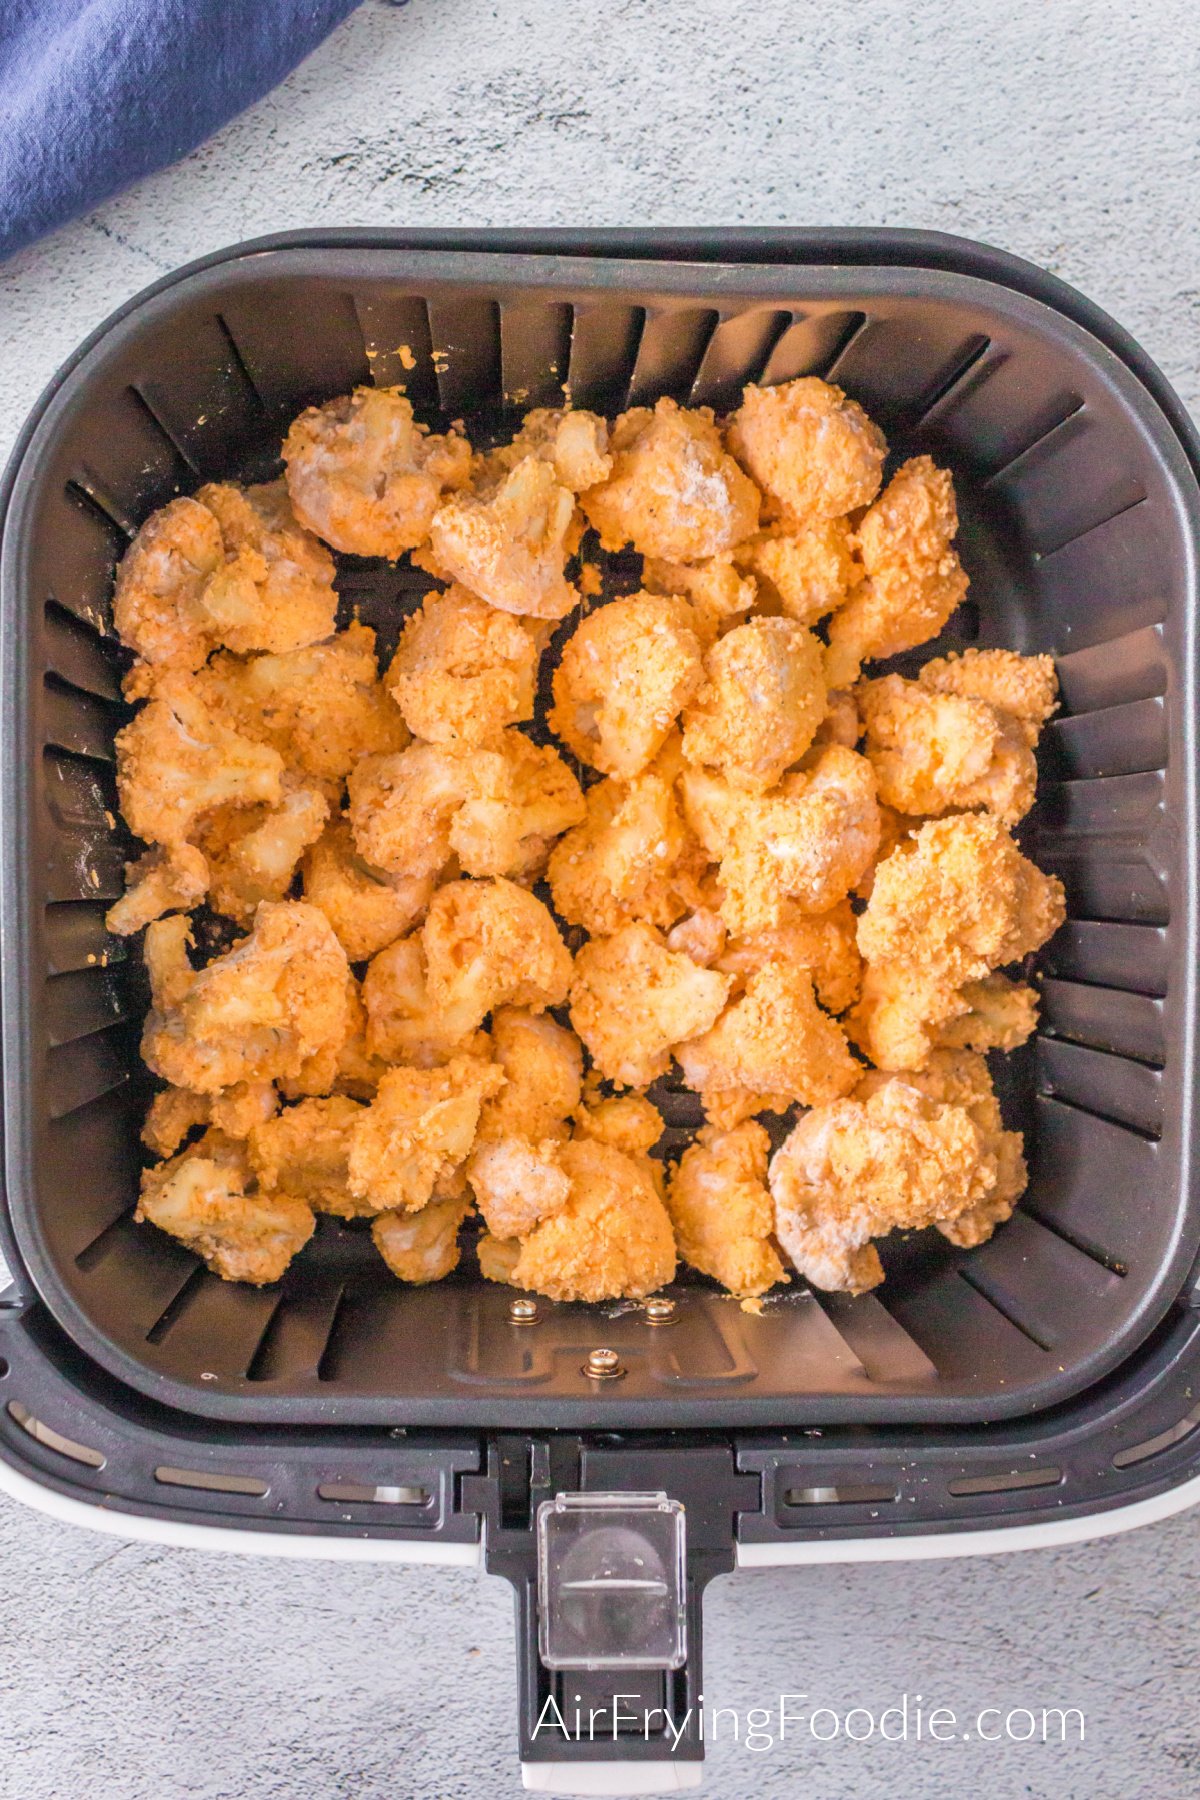 Buffalo Cauliflower in the air fryer ready to cook.